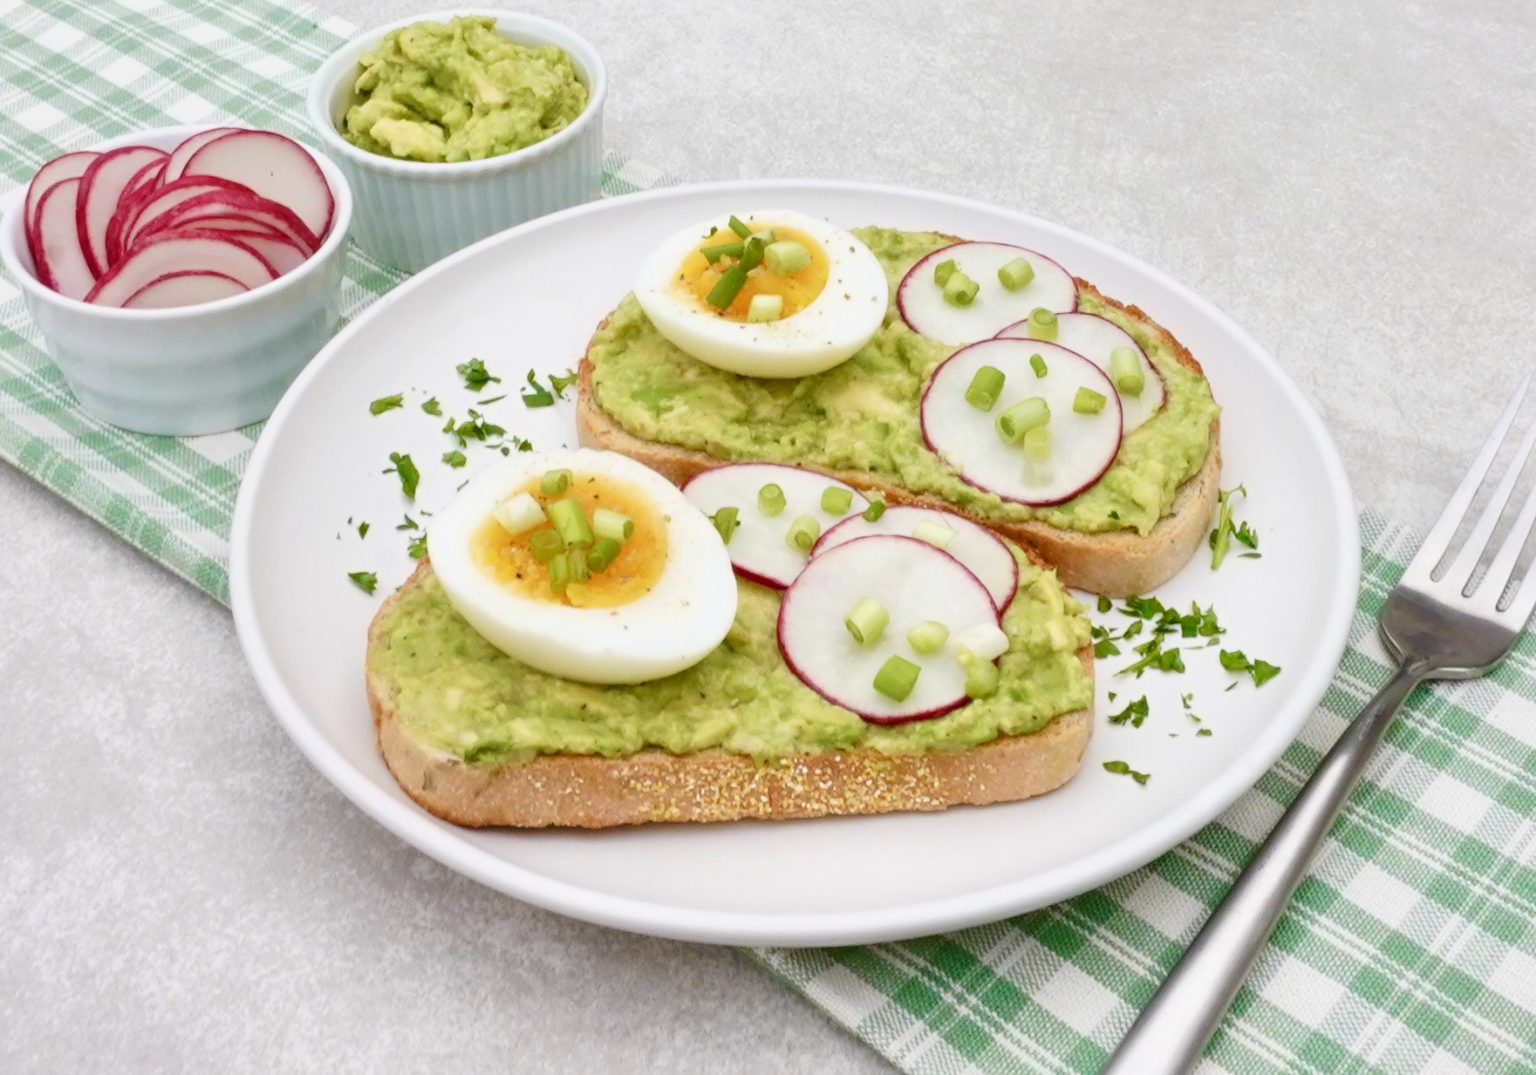 Jammy Egg Avocado Toast is an easy and delicious breakfast